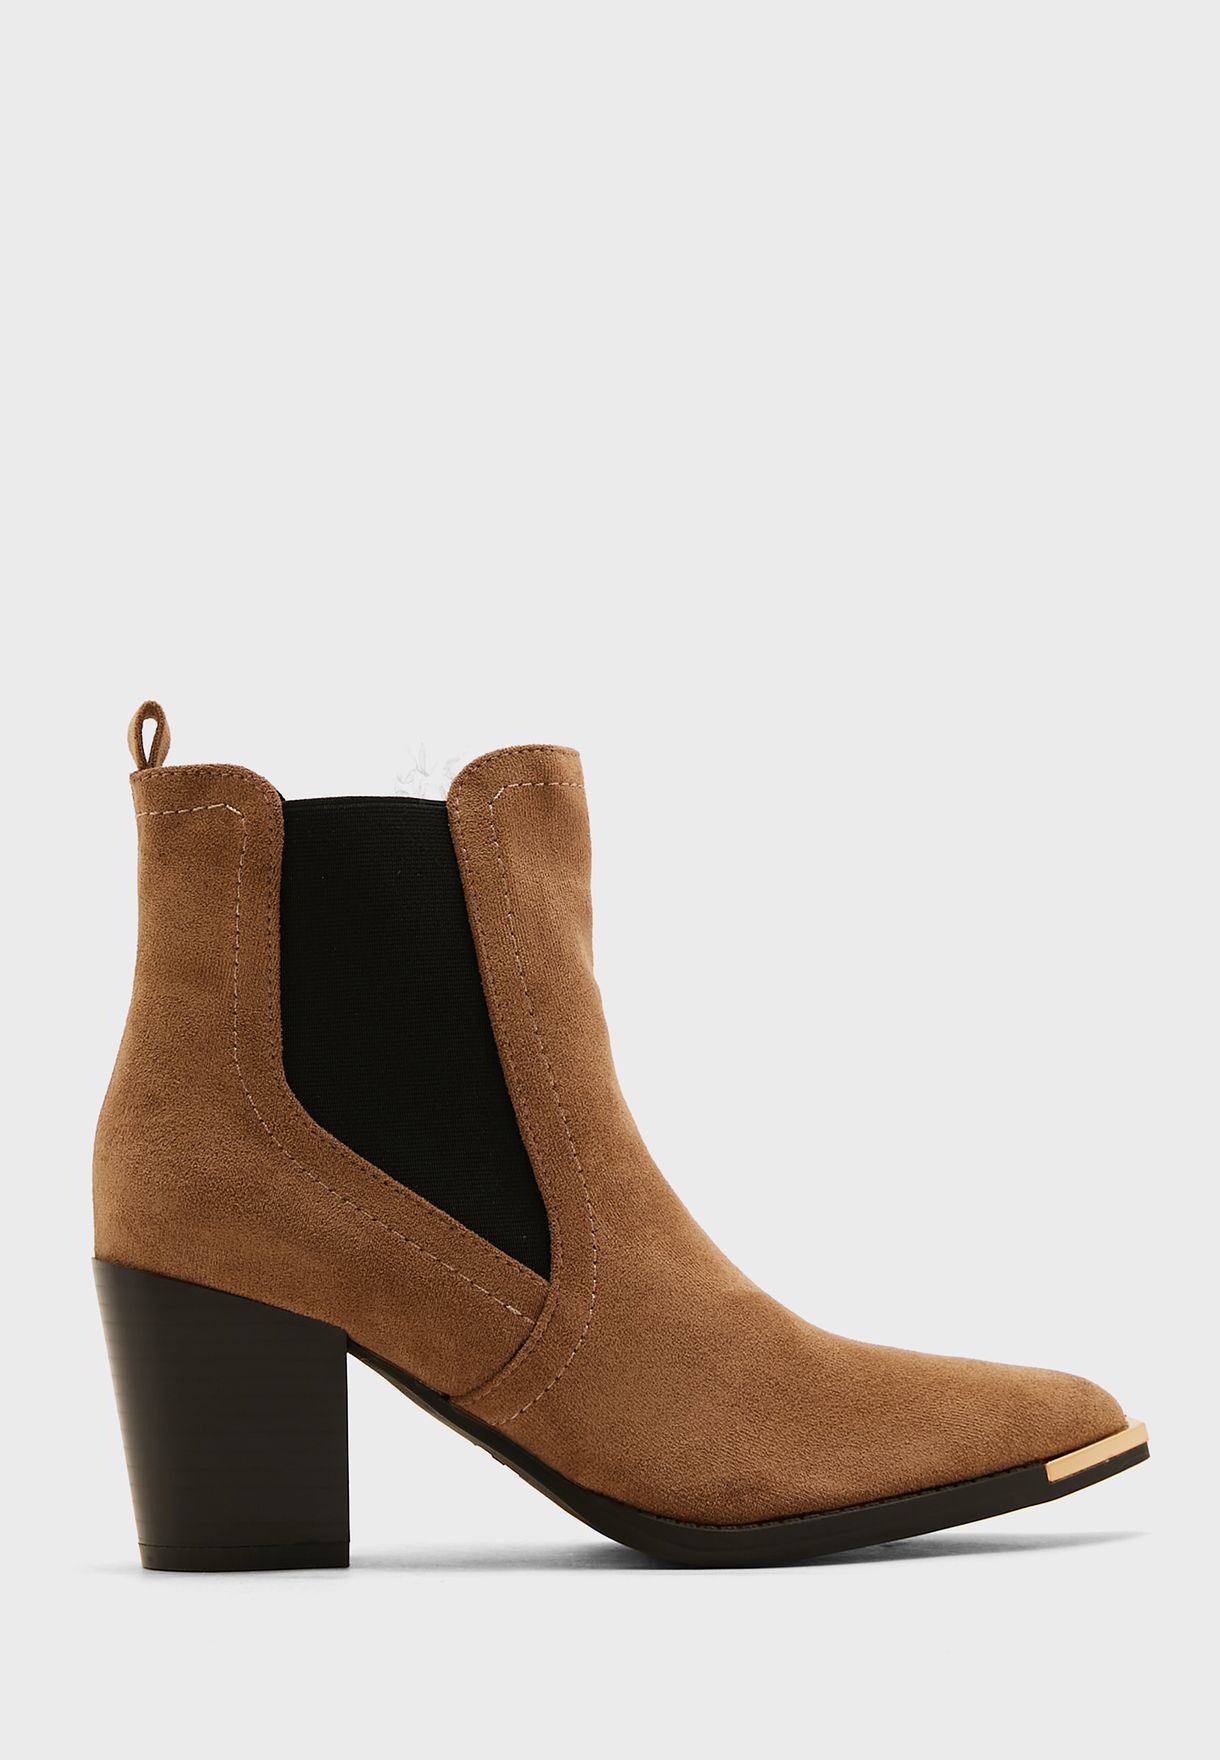 Buy Deezee CCC beige Classic Ankle Boots for Women in Dubai, Abu Dhabi